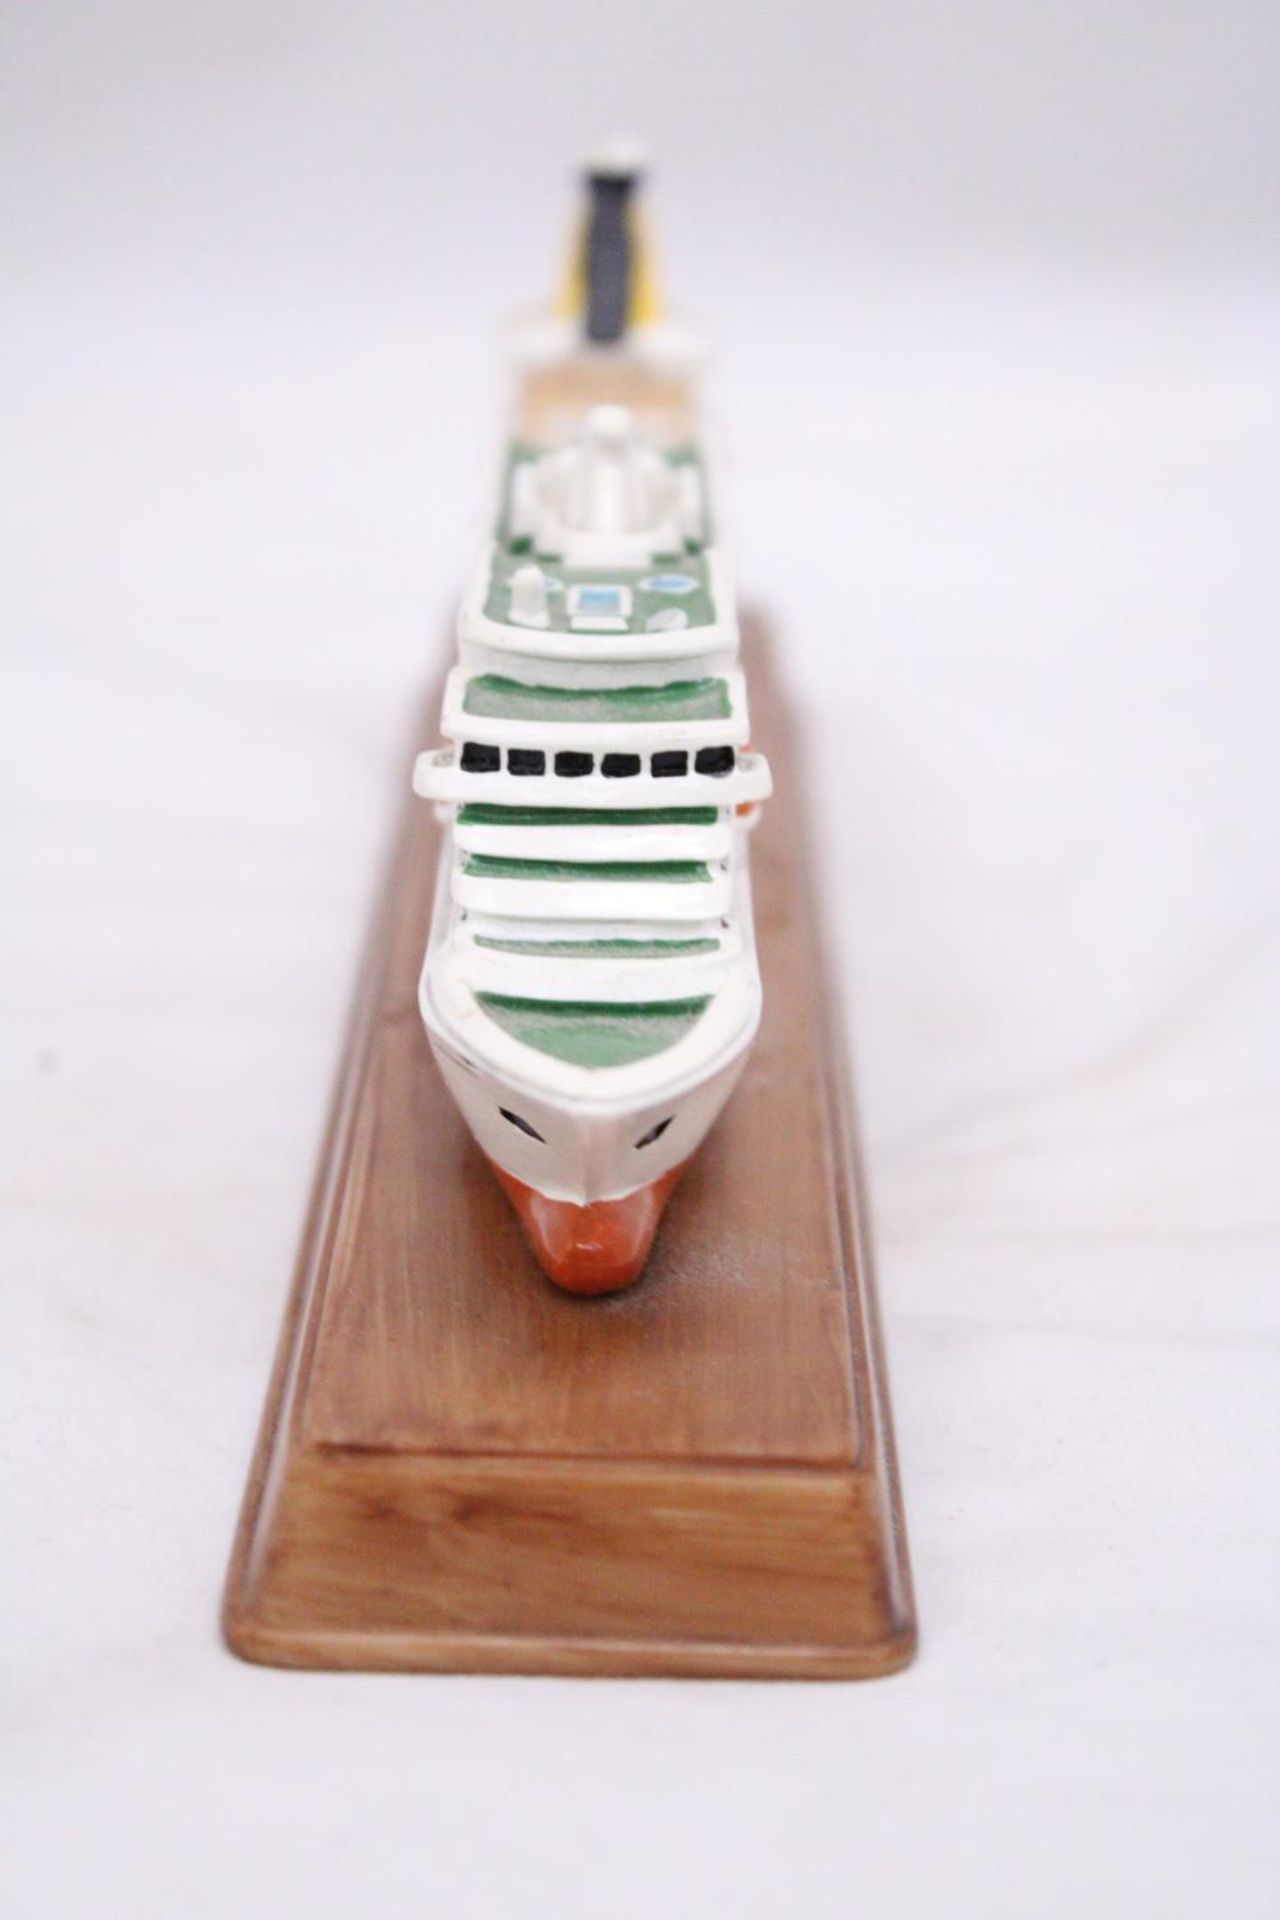 A HEAVY SOLID OCEAN LINER ON WOODEN STAND (ARTEMIS), LENGTH 26CM, HEIGHT 6CM - Image 3 of 6